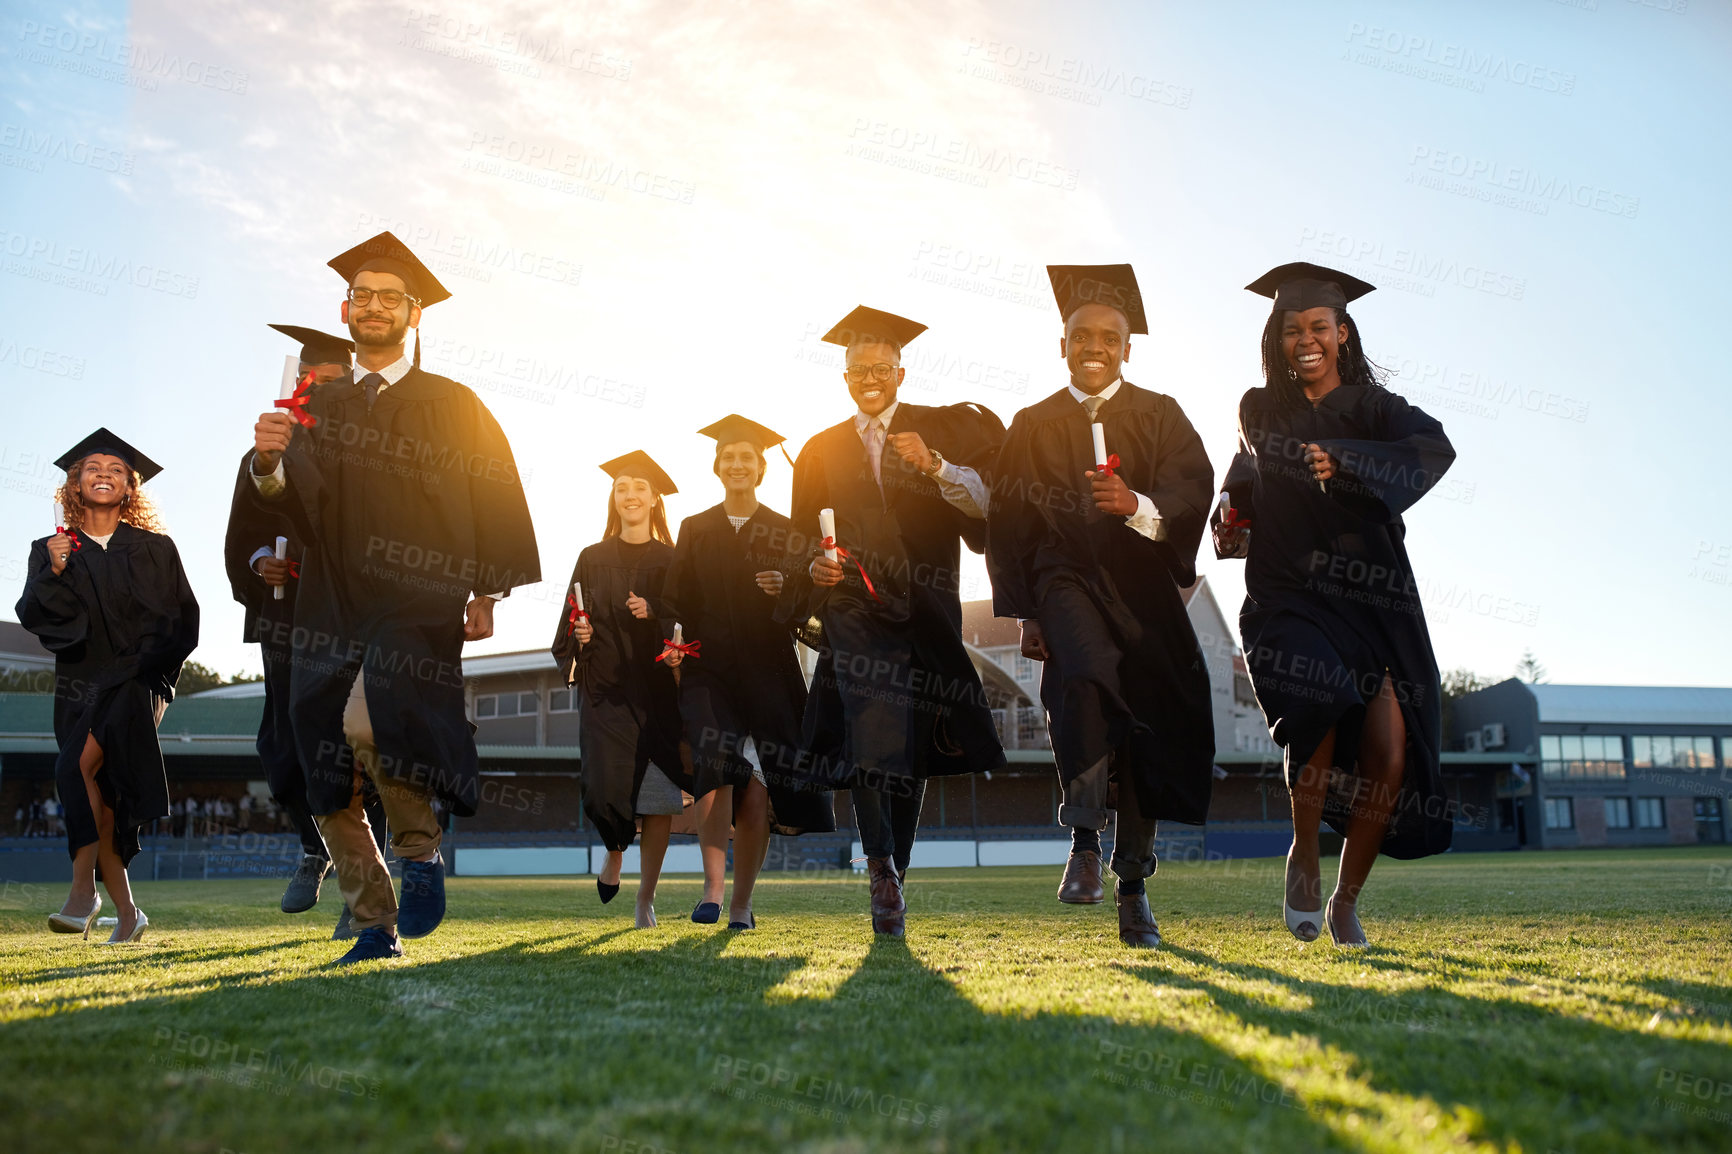 Buy stock photo Portrait of a group of university students celebrating their graduation